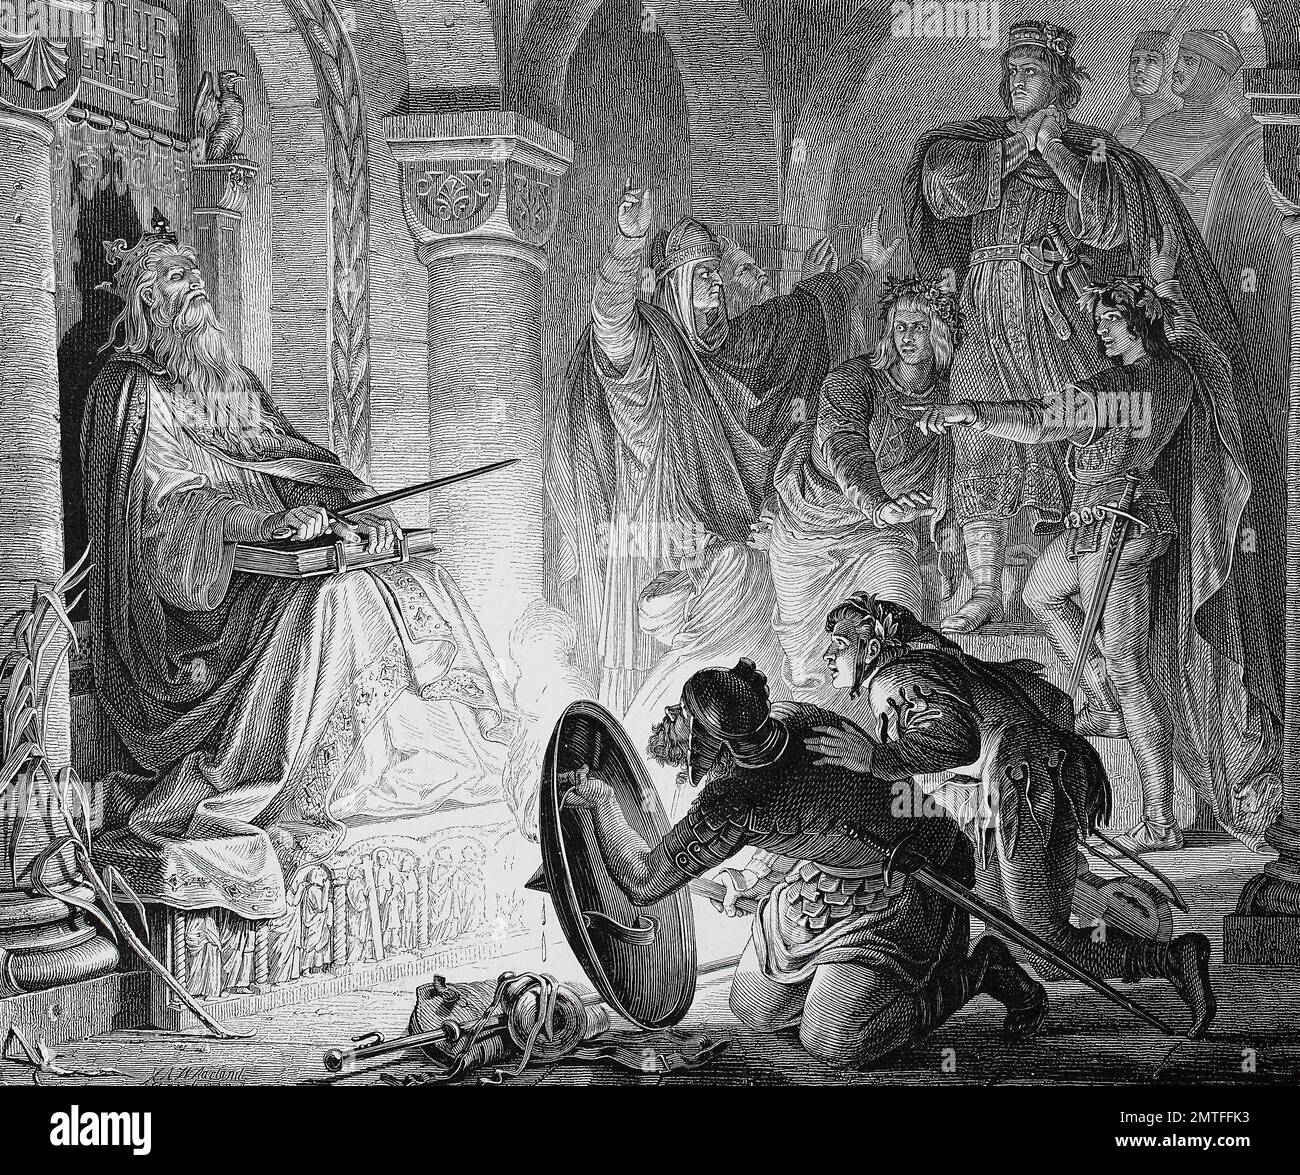 Otto III, 980 - 23 January 1002, was Holy Roman Emperor from 996 until his early death in 1002, here in the grave of Charlemagne, 2 April 742/747/748 - 28 January 814, also known as Charles the Great, historical illustration Stock Photo